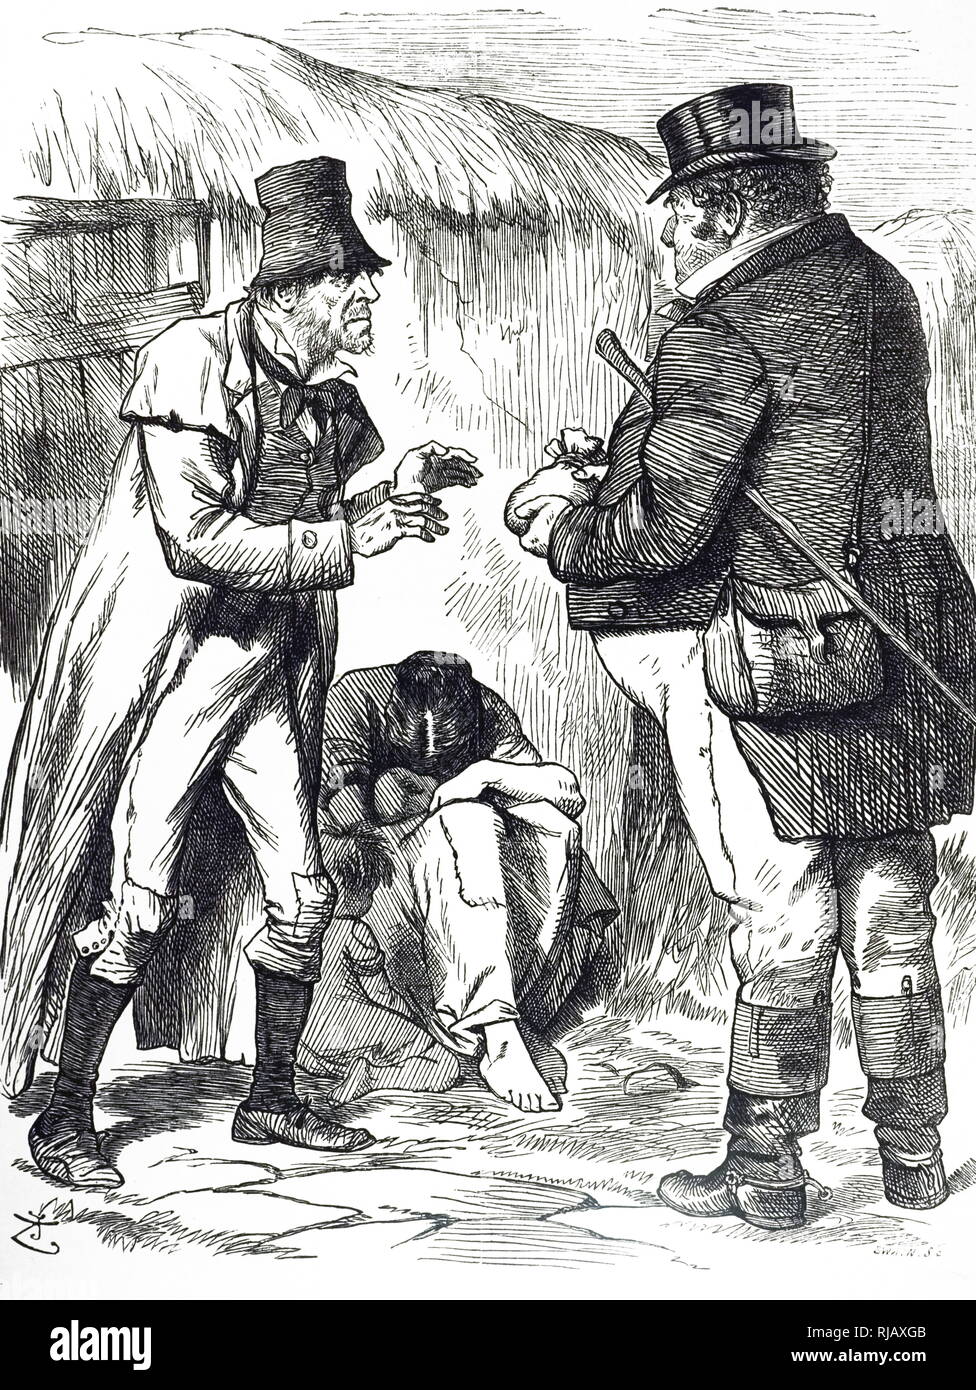 A cartoon commenting on the Irish Potato Famine. Illustrated by John Tenniel (1820-1914) an English illustrator, graphic humourist, and political cartoonist. Dated 19th century Stock Photo